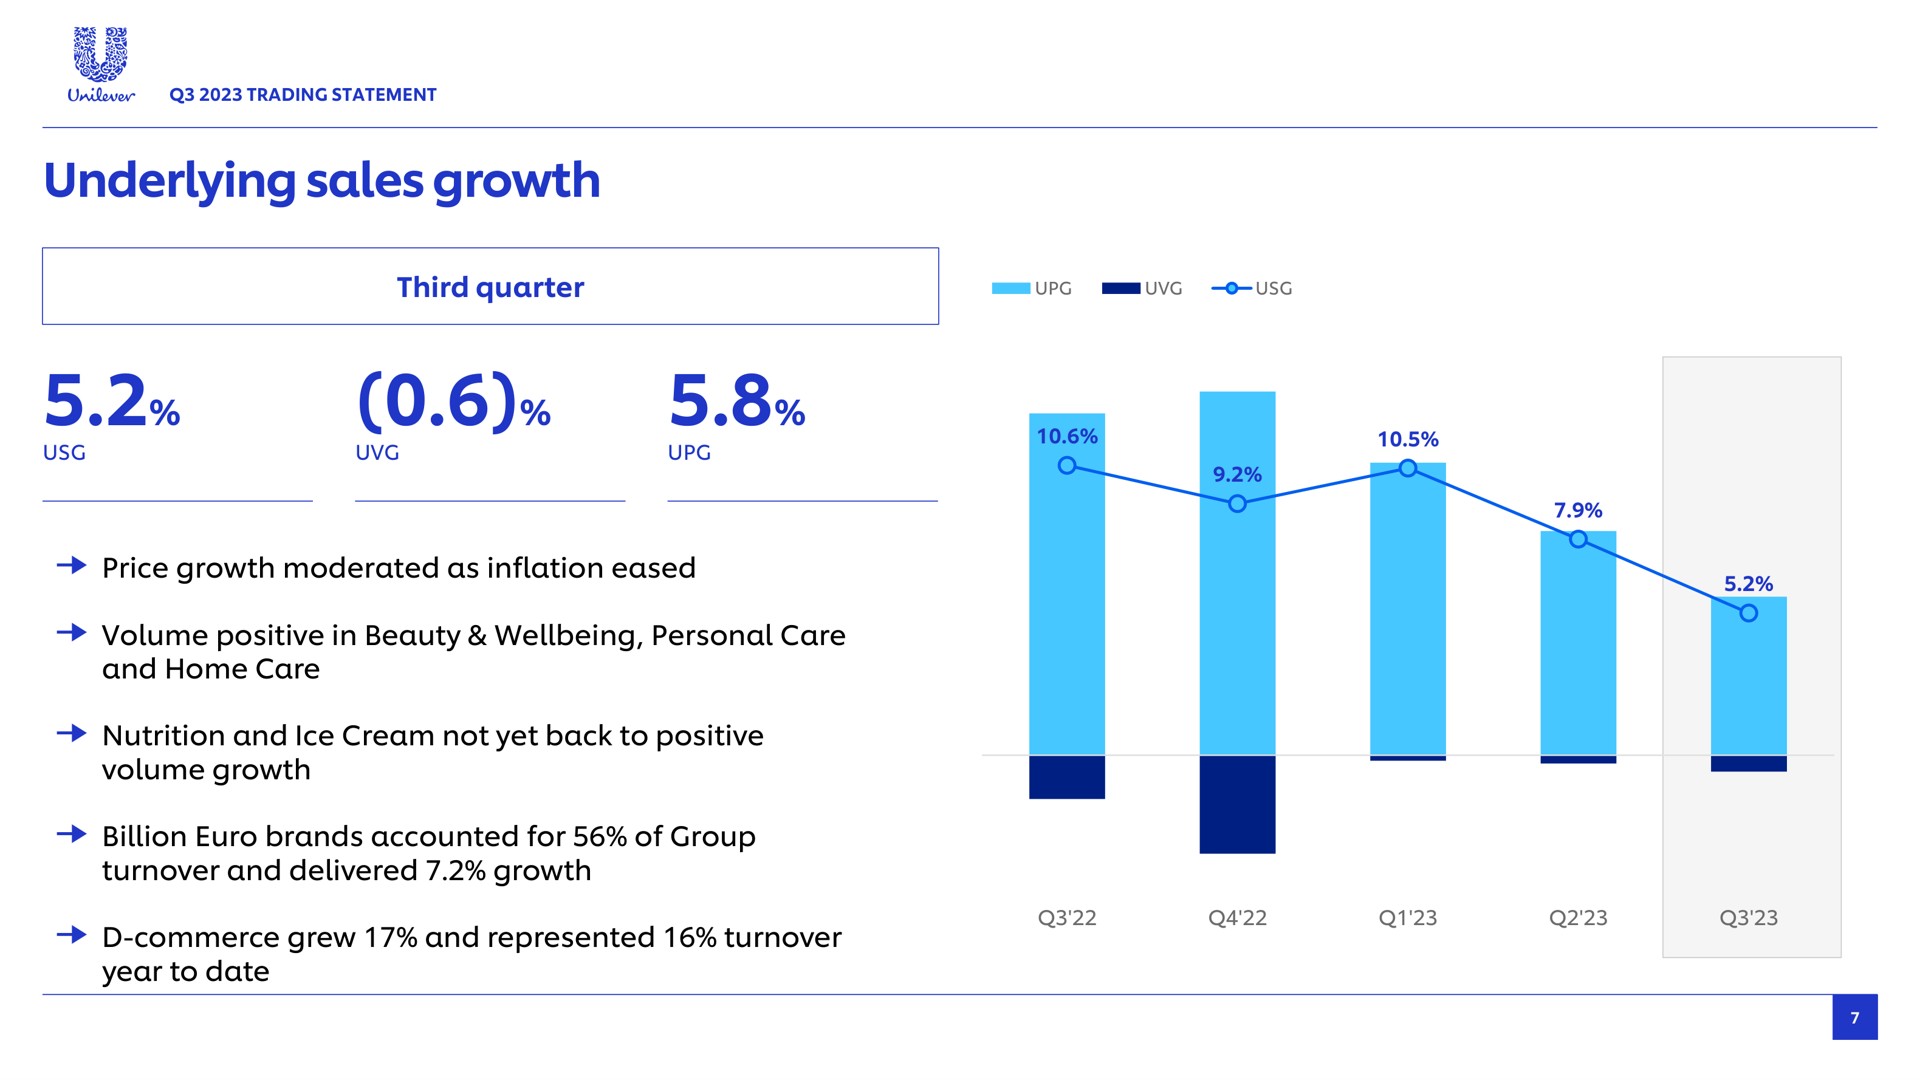 underlying sales growth third quarter price moderated as inflation eased volume positive in beauty personal care and home care nutrition and ice cream not yet back to positive volume billion brands accounted for of group turnover and delivered commerce grew and represented turnover year to date | Unilever